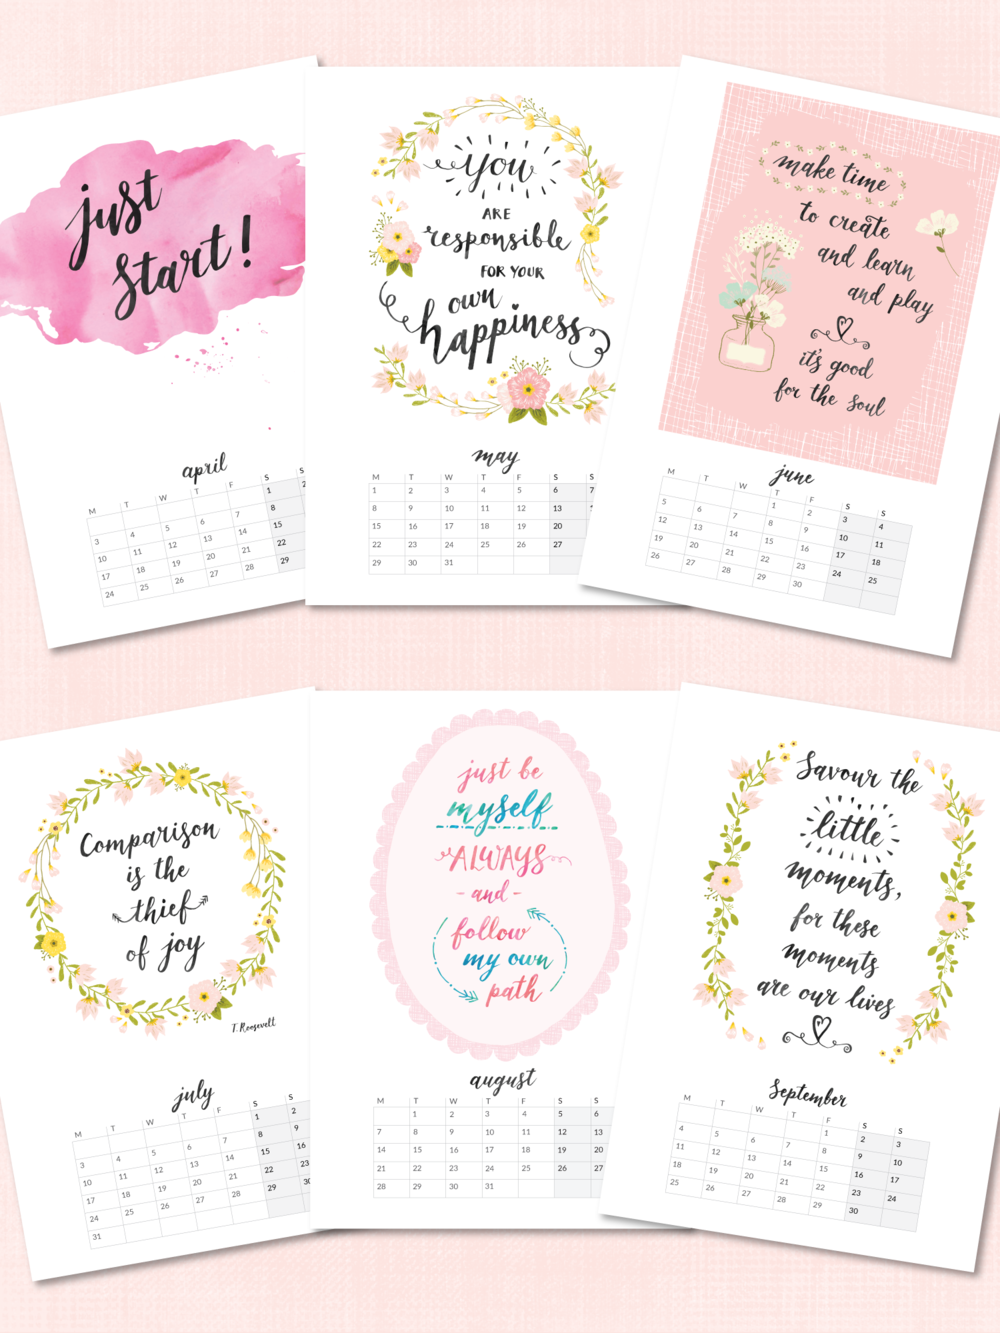 The Best Inspirational Quote Calendar Home, Family, Style and Art Ideas